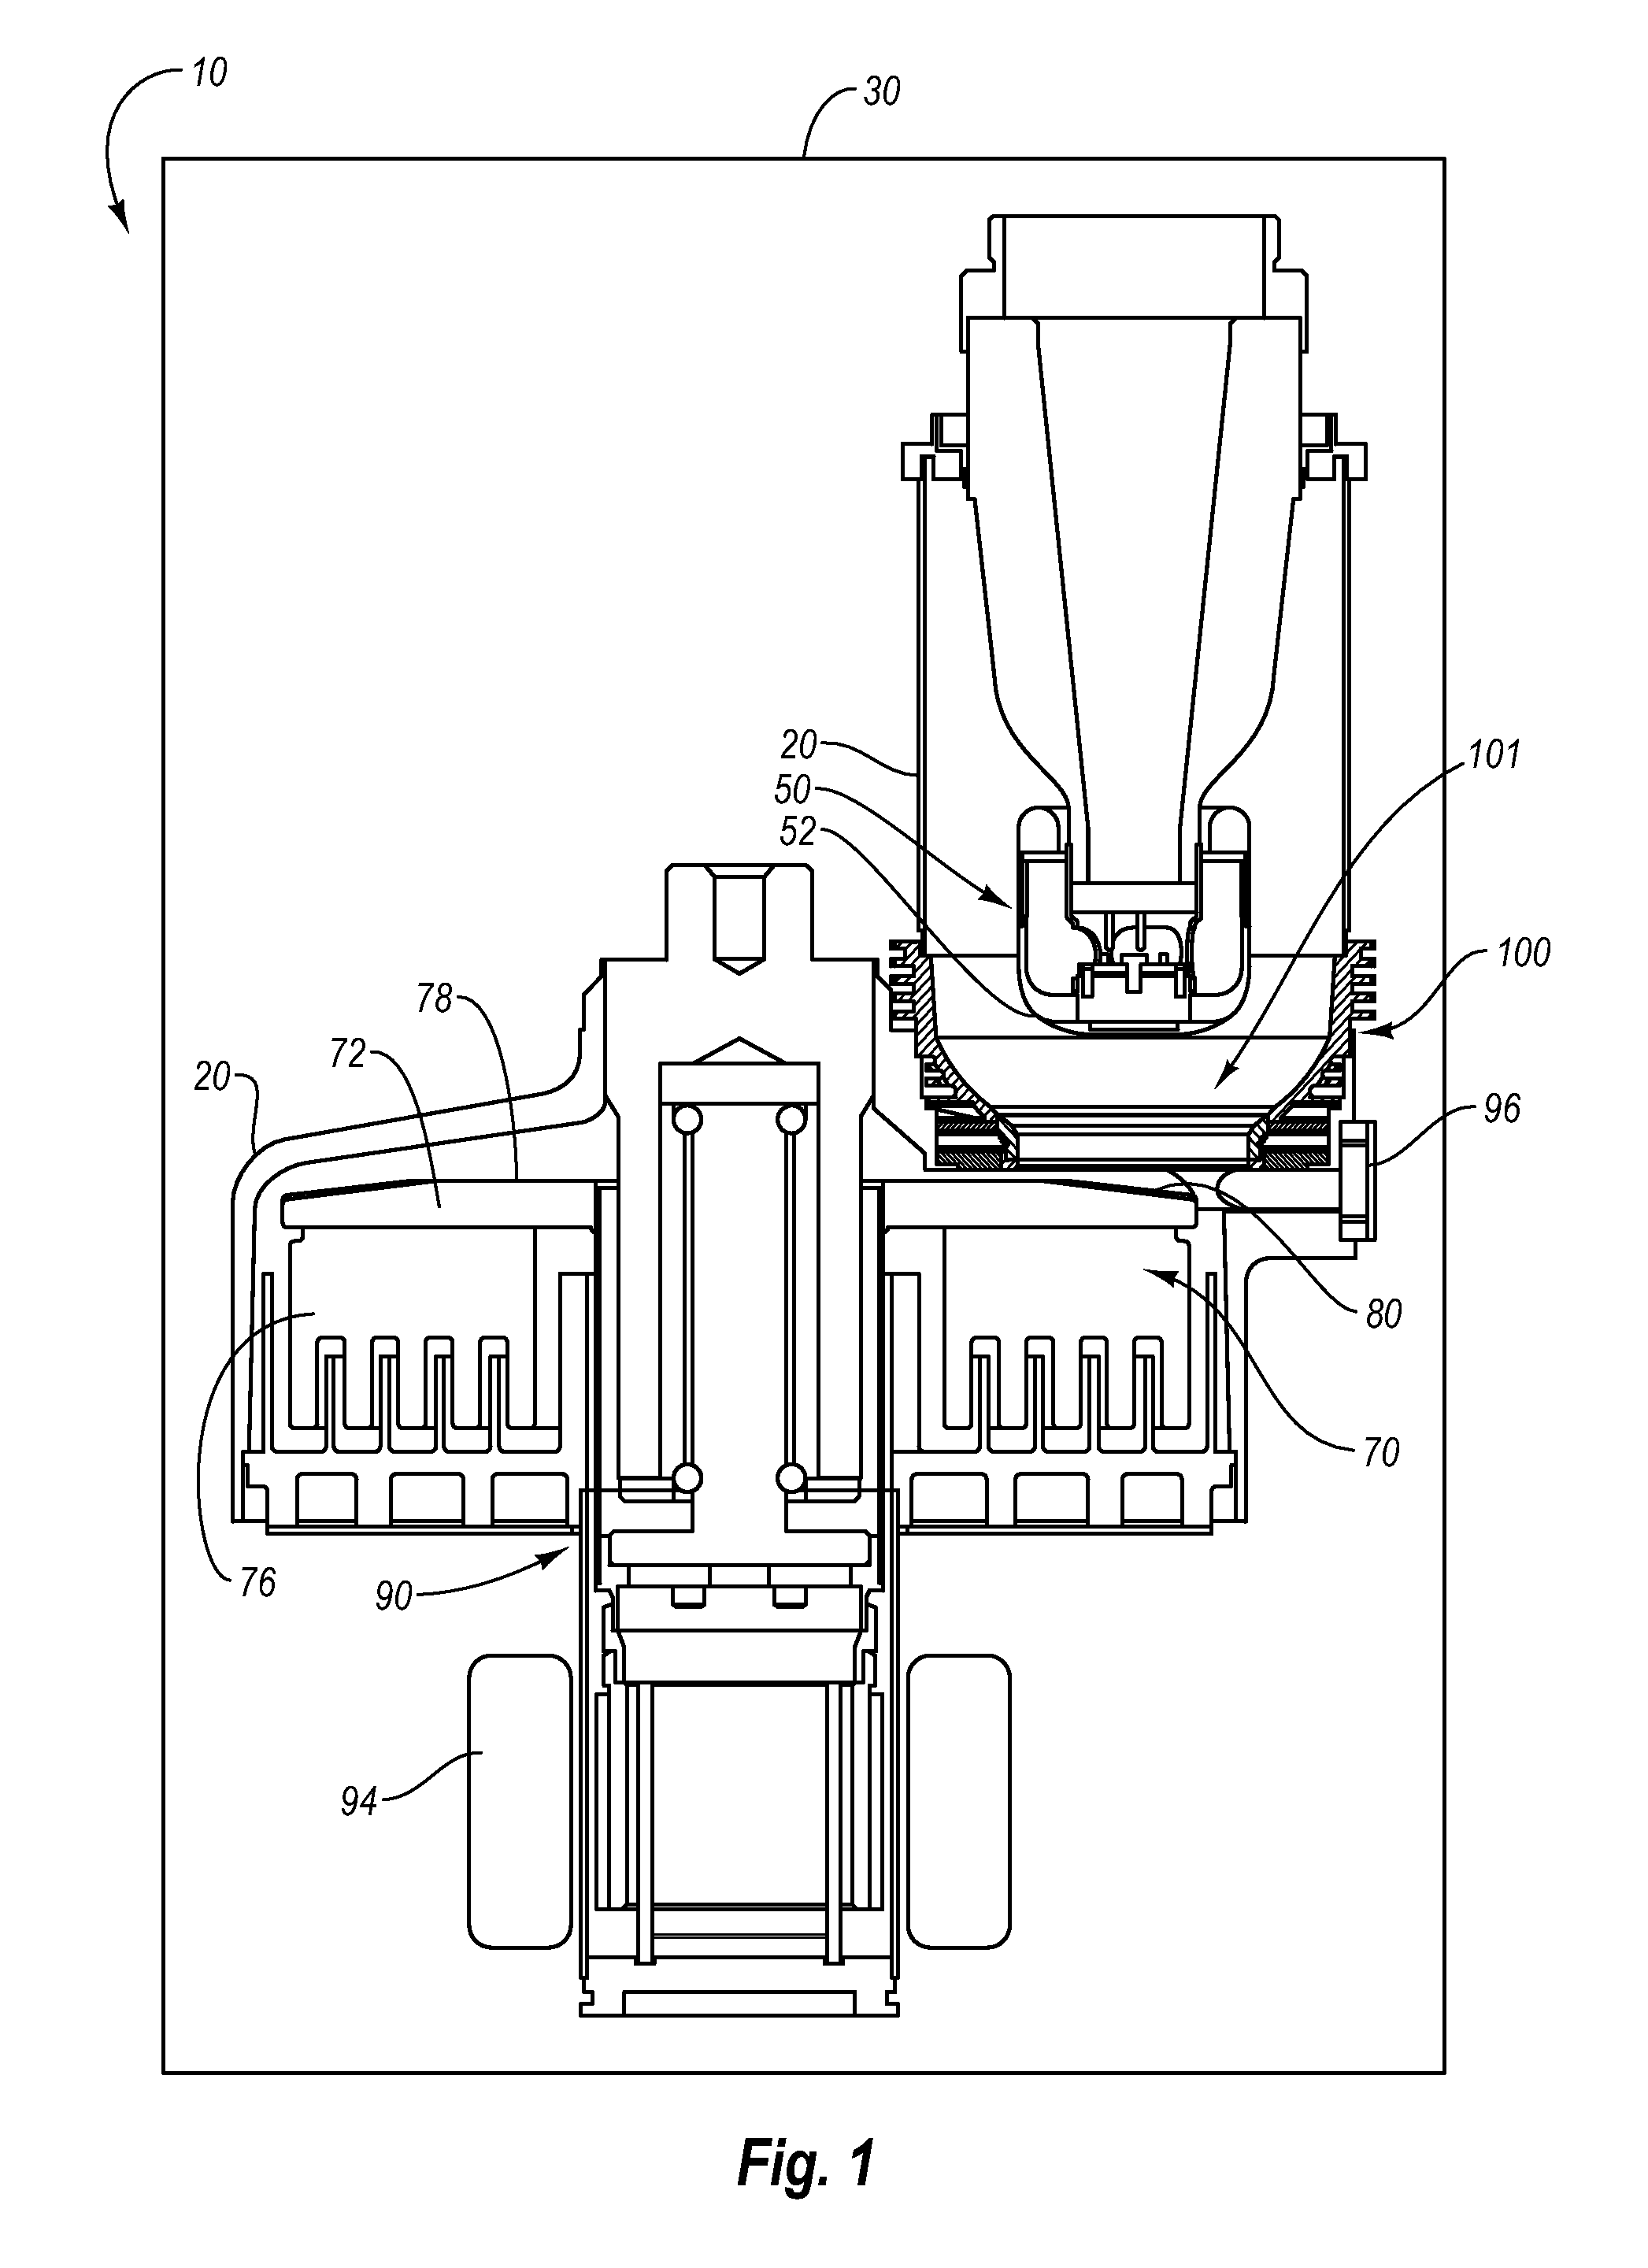 Aperture shield incorporating refractory materials